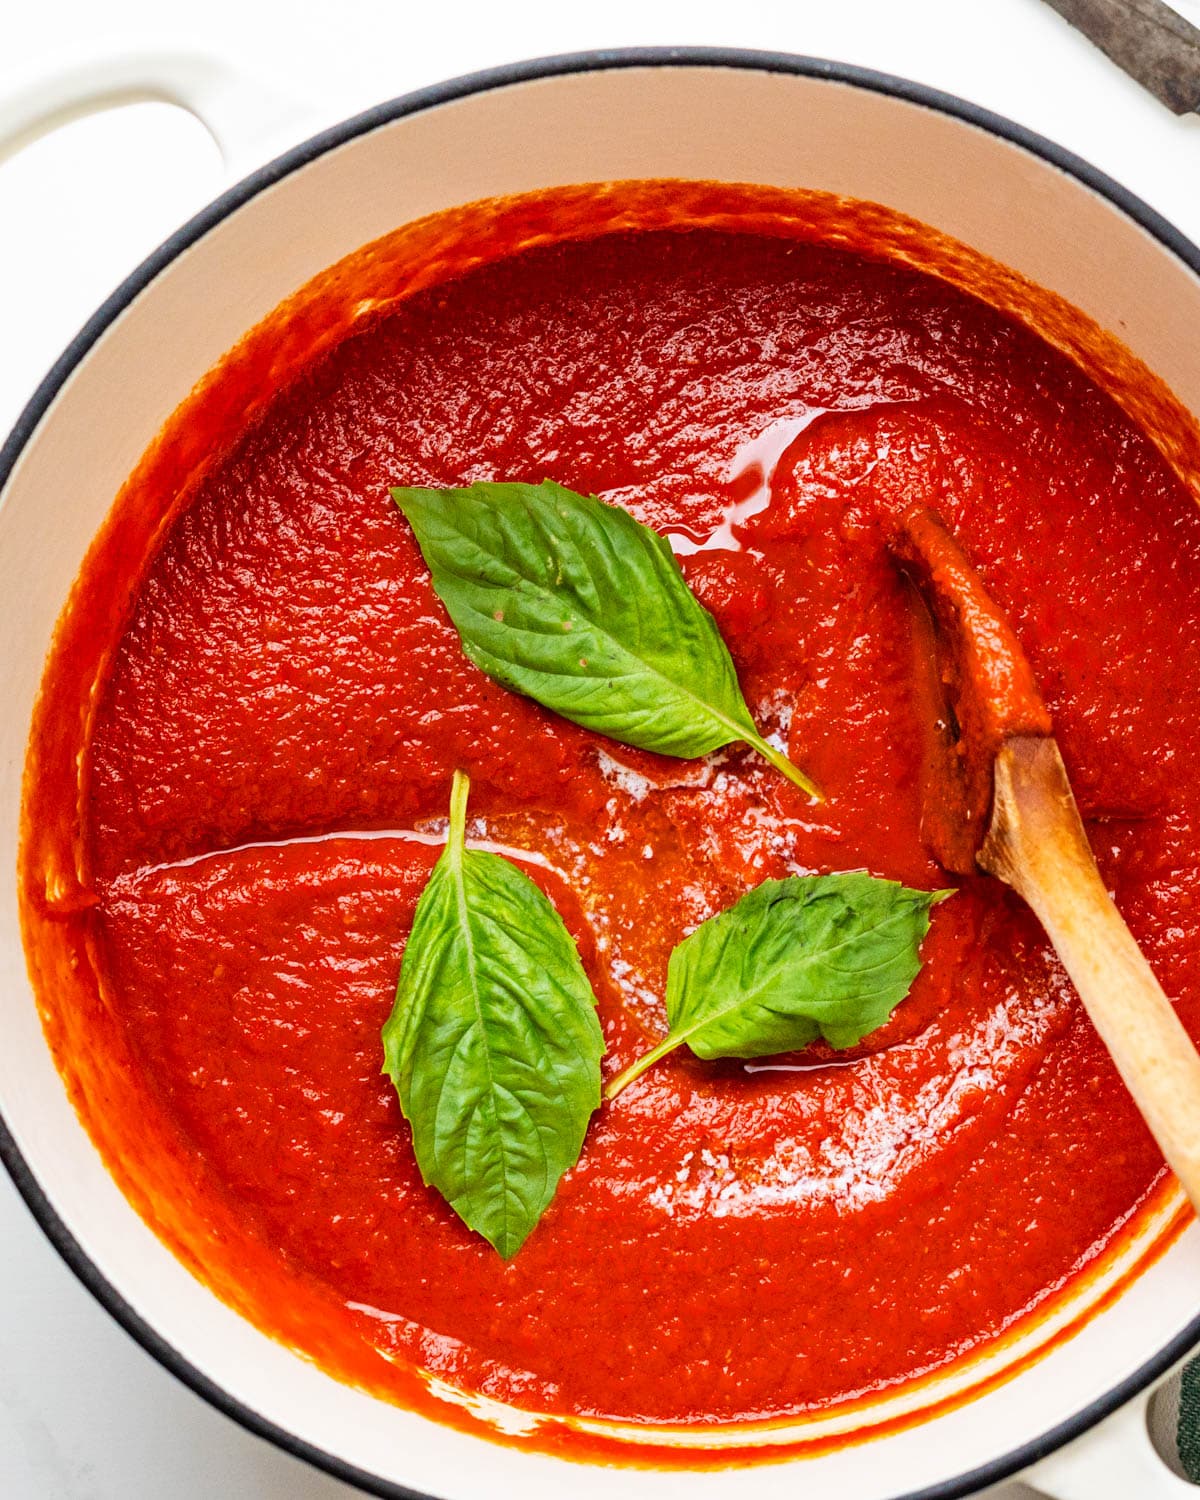 Homemade Pomodoro sauce with fresh basil leaves in a Dutch oven.